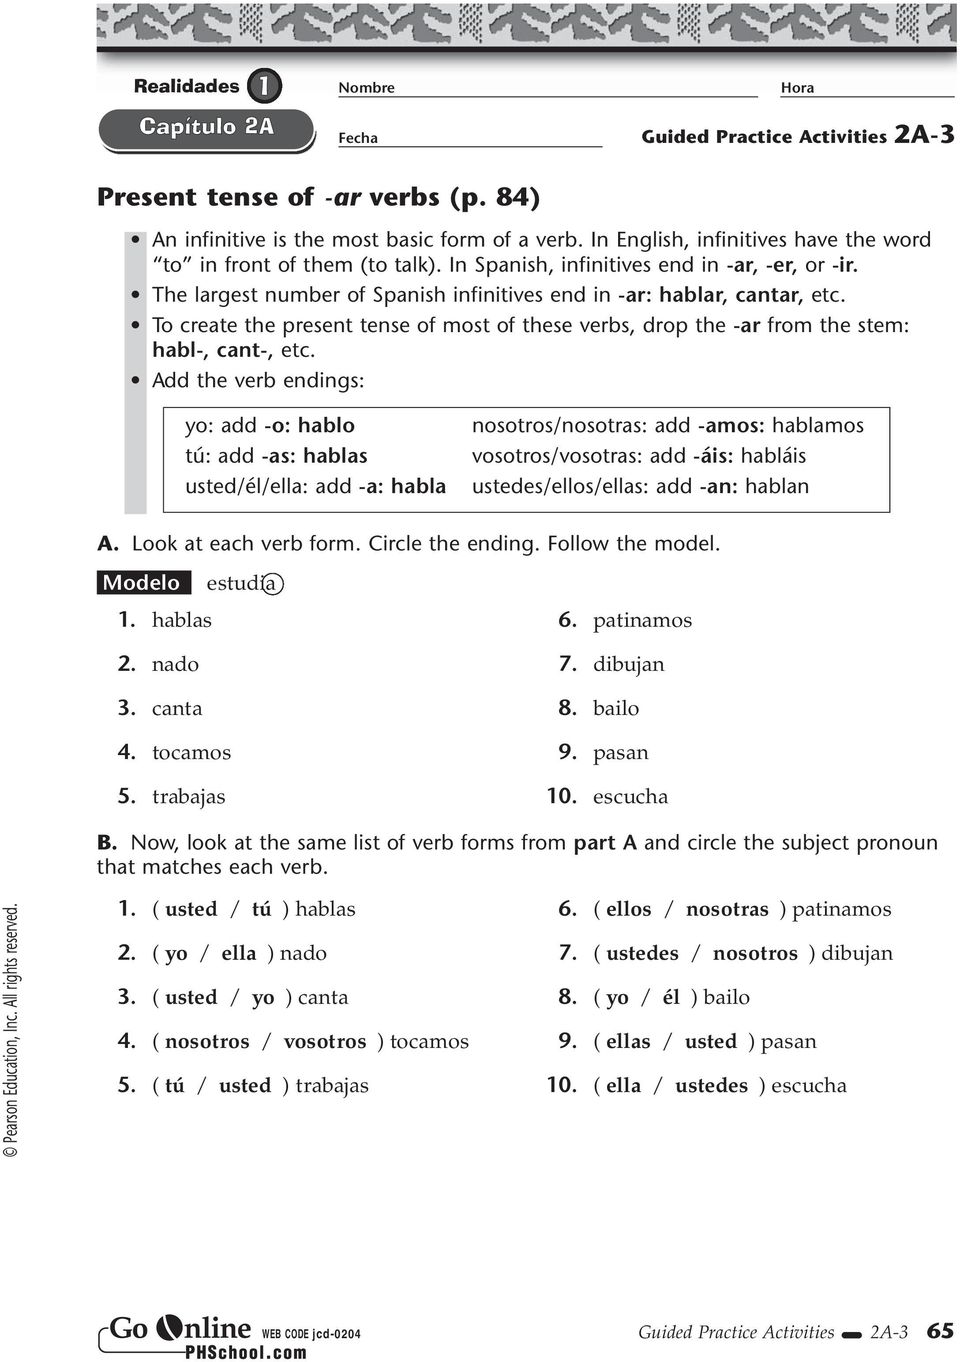 To create the present tense of most of these verbs, drop the -ar from the stem: habl-, cant-, etc.